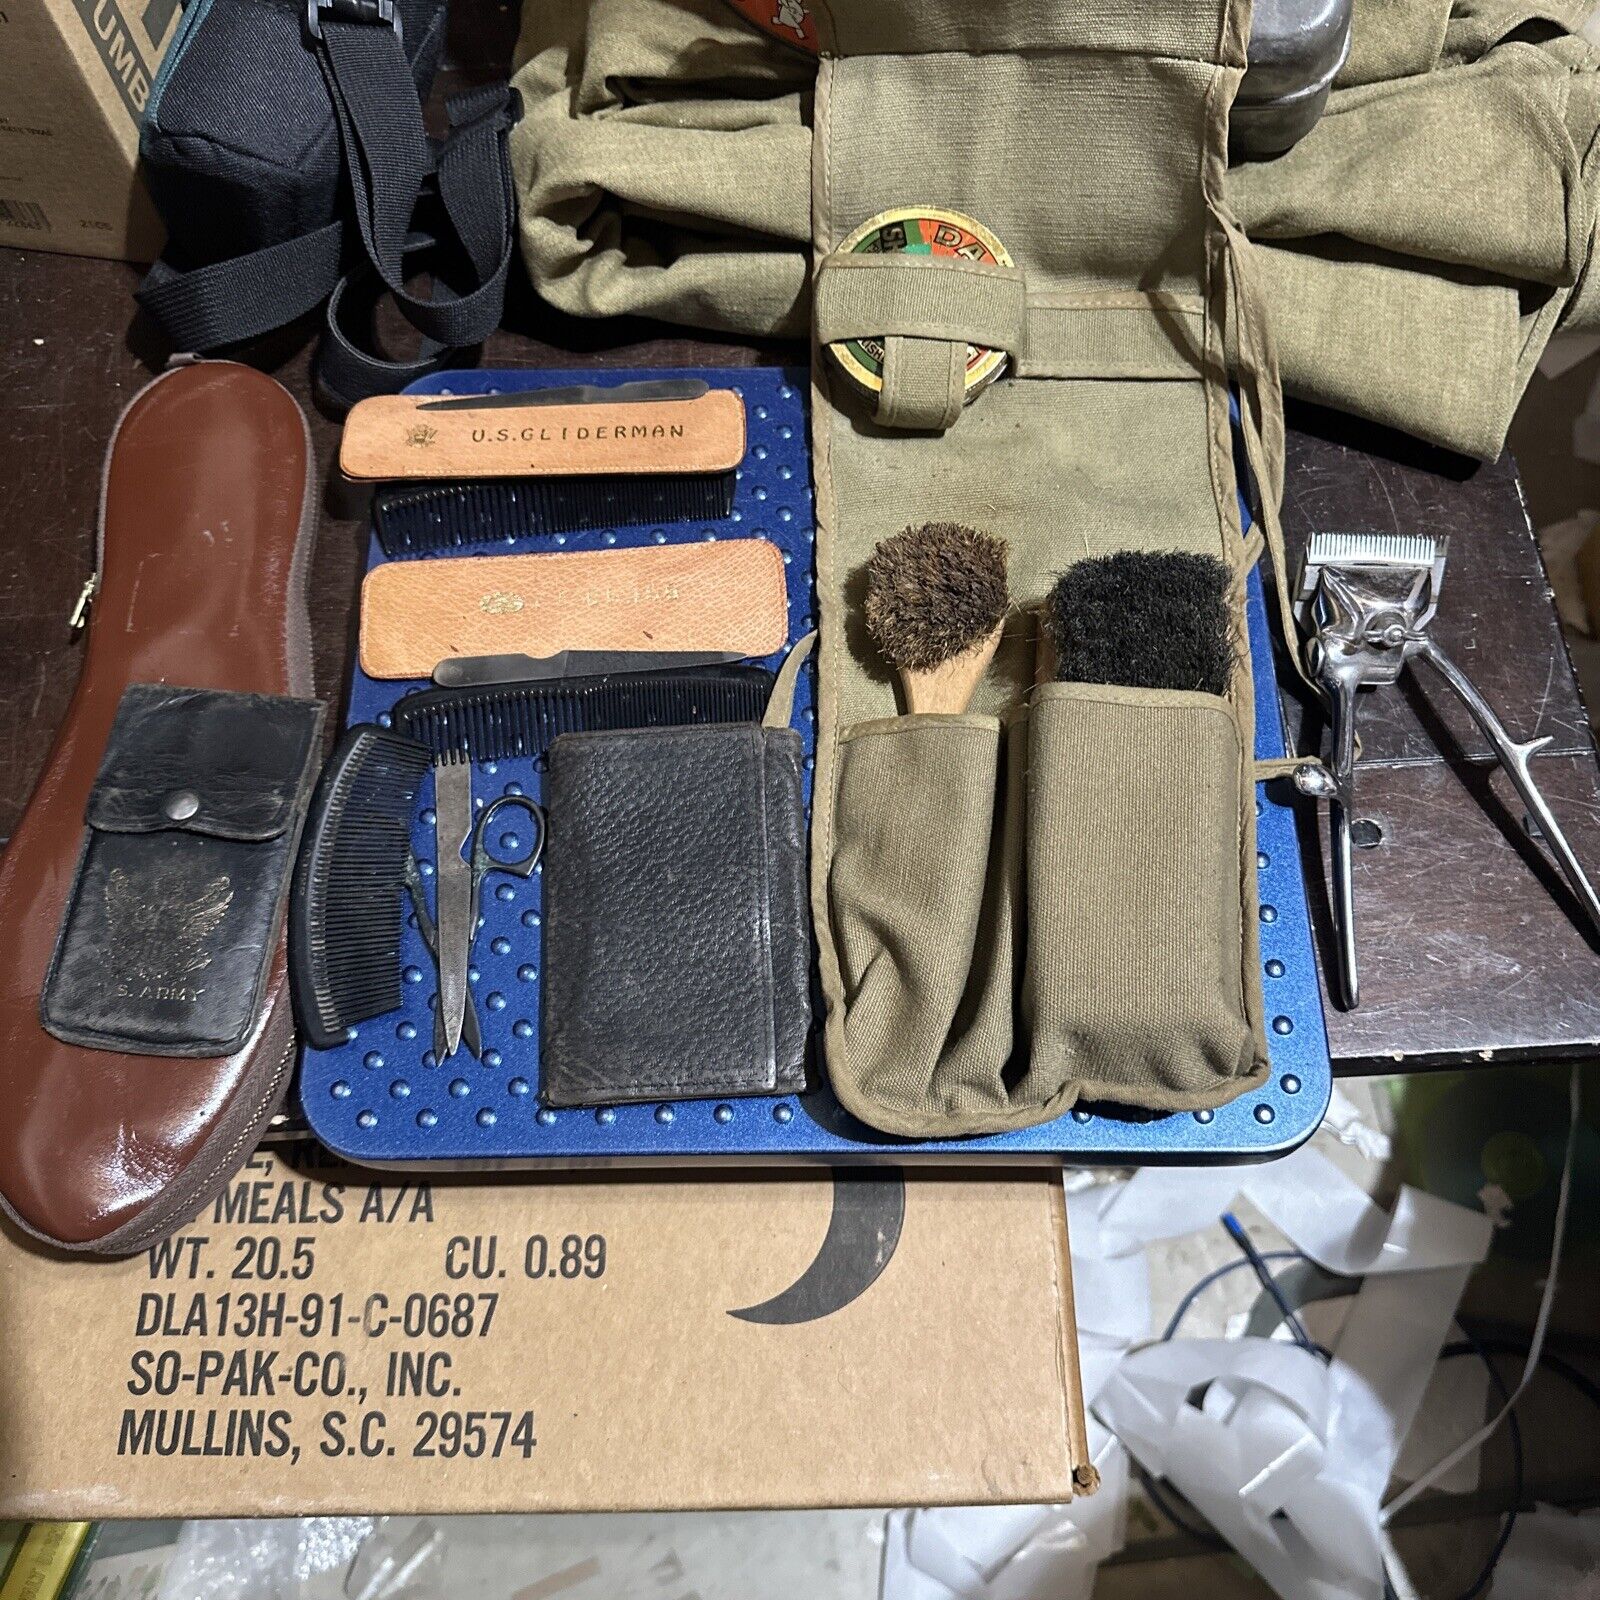 WWII U.S. Army, Large Grouping of Original WWII Soldier’s Grooming Kit Supplies